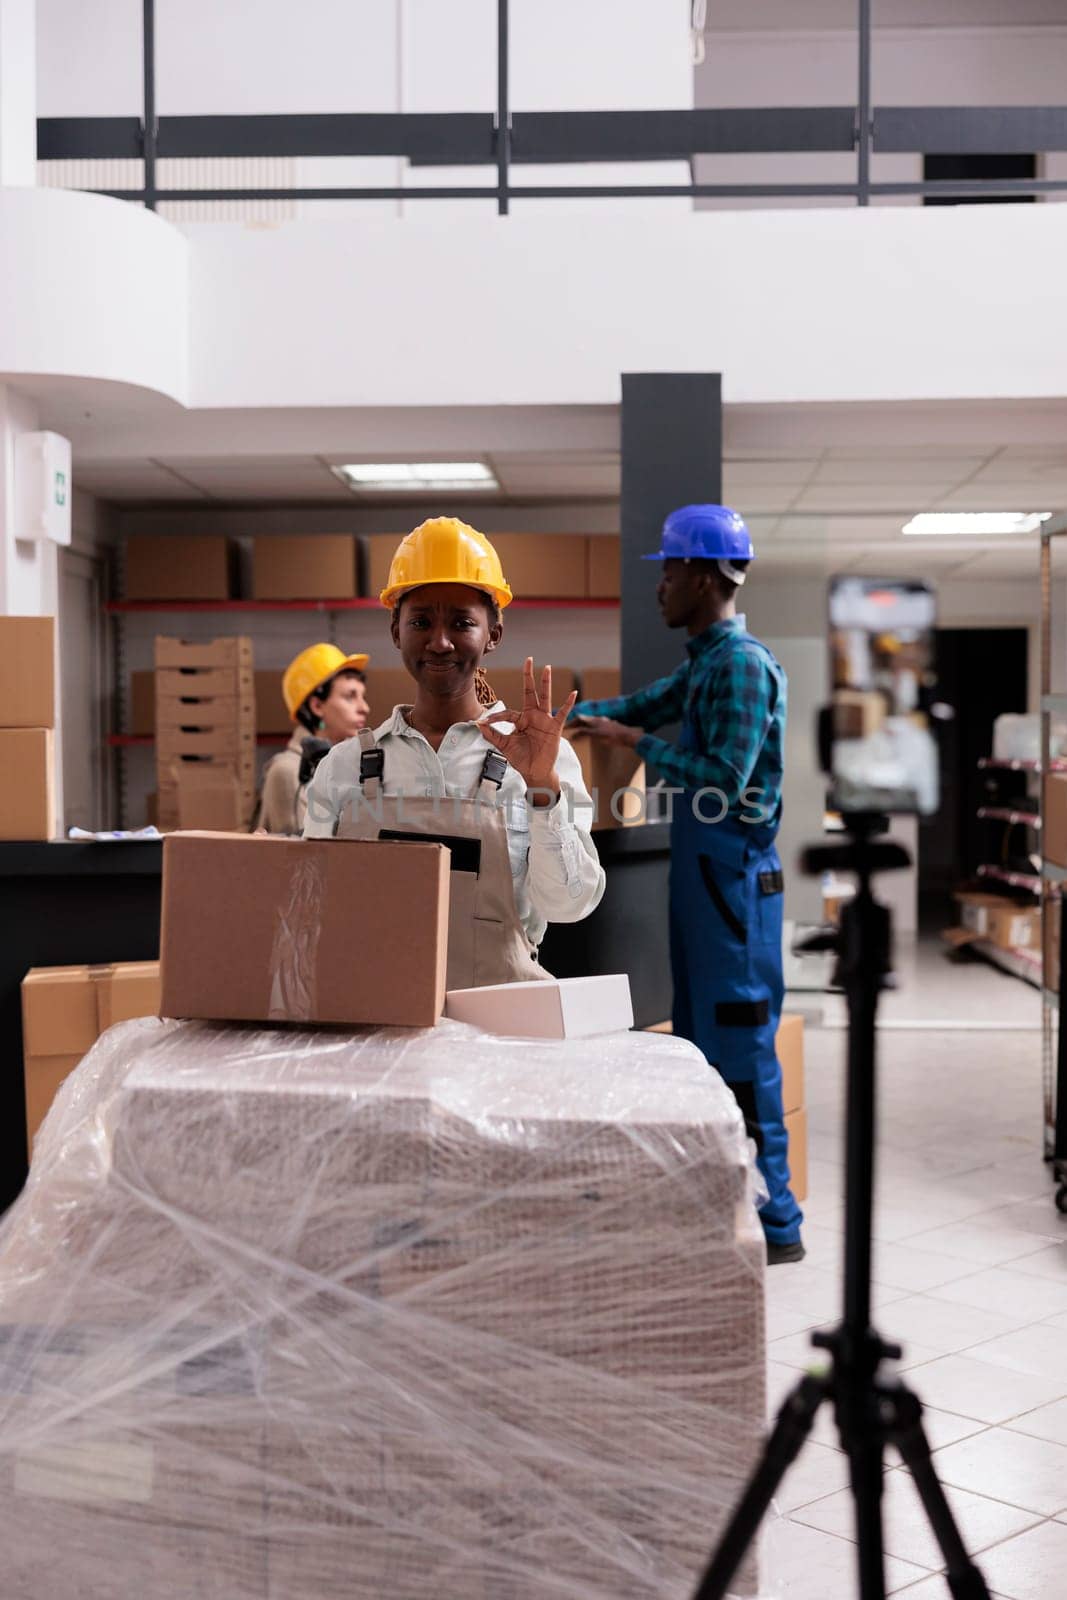 Storehouse employee shooting stock checking video and showing ok gesture with fingers. Retail storehouse workers doing goods inventory and looking at mobile phone camera with okay sign